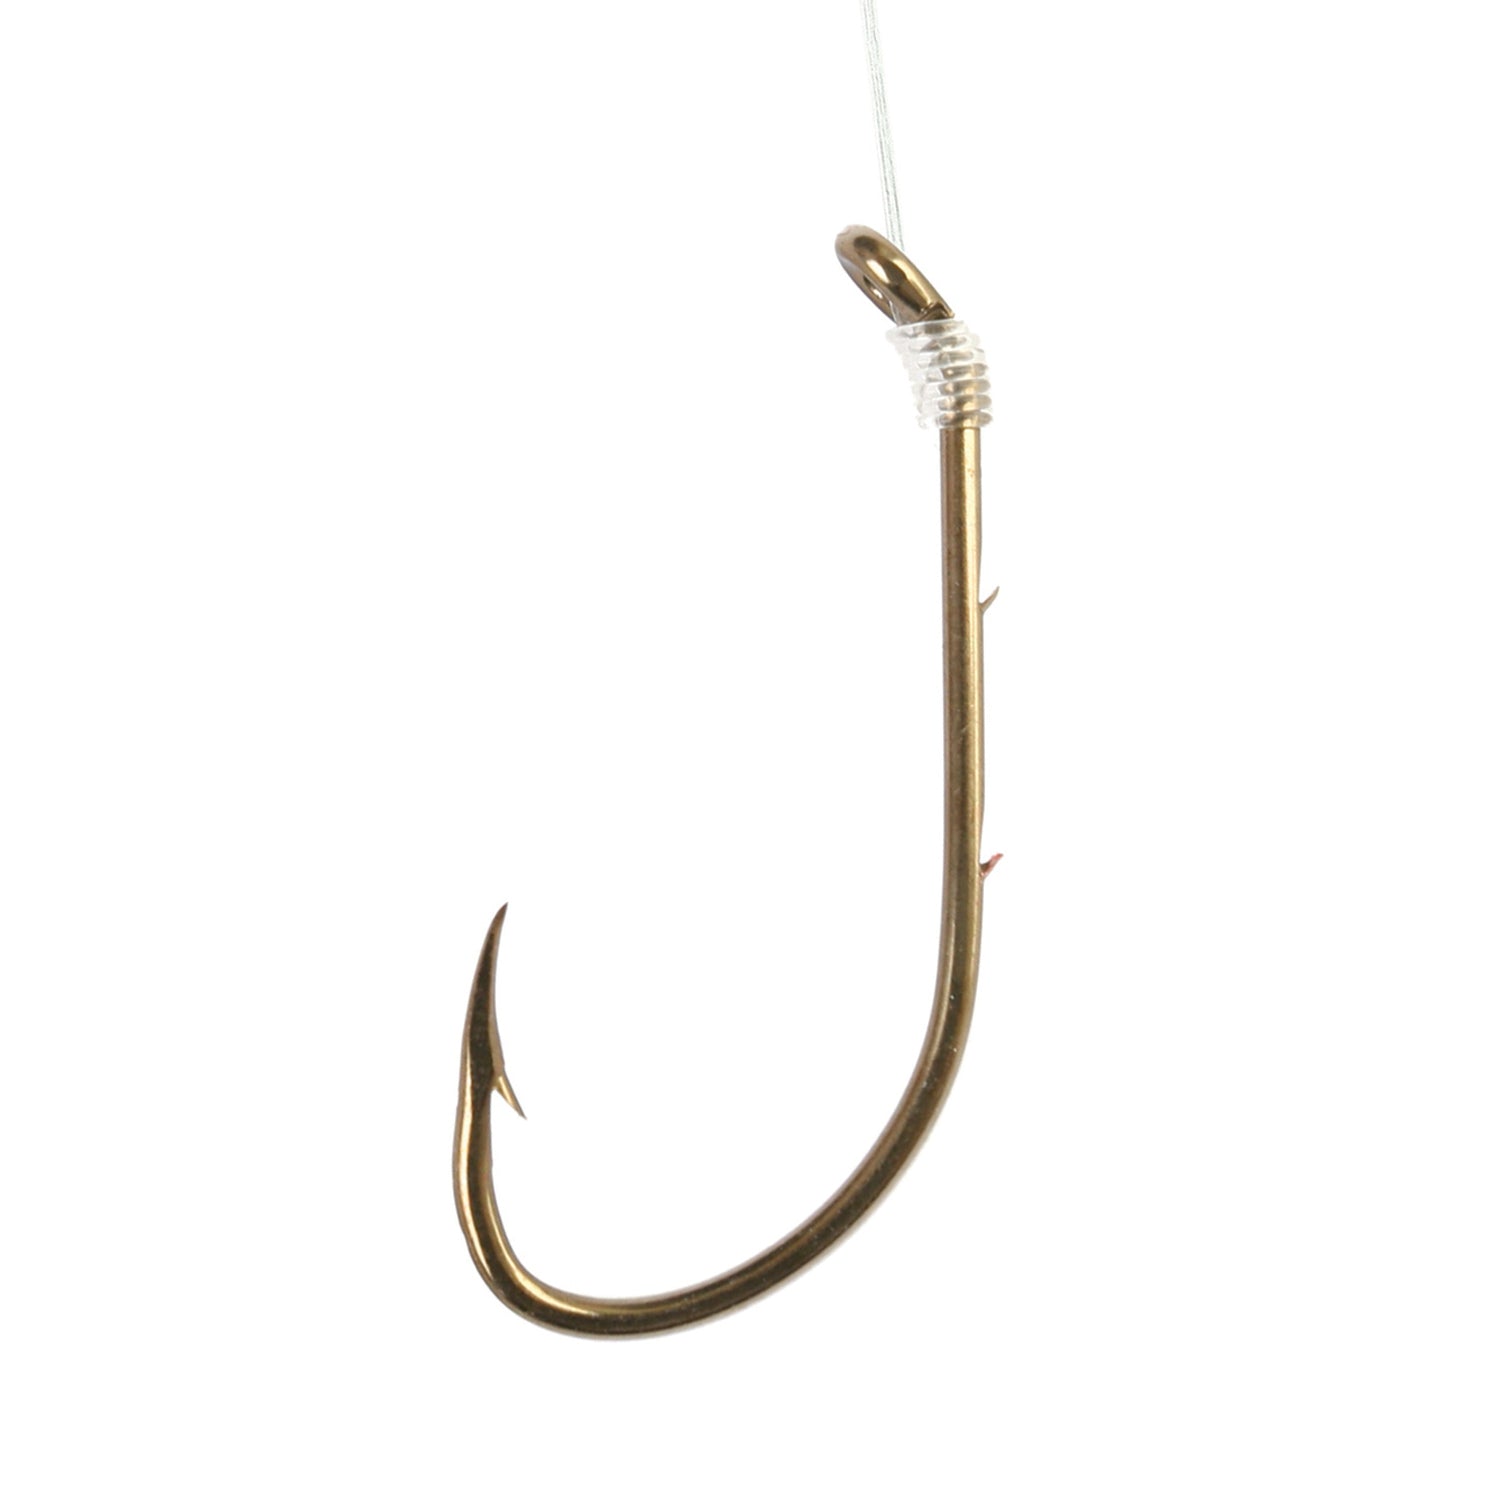 Fishing Snells Stainless Steel Wire Leader Rigs Snelled Hooks Pack of 10